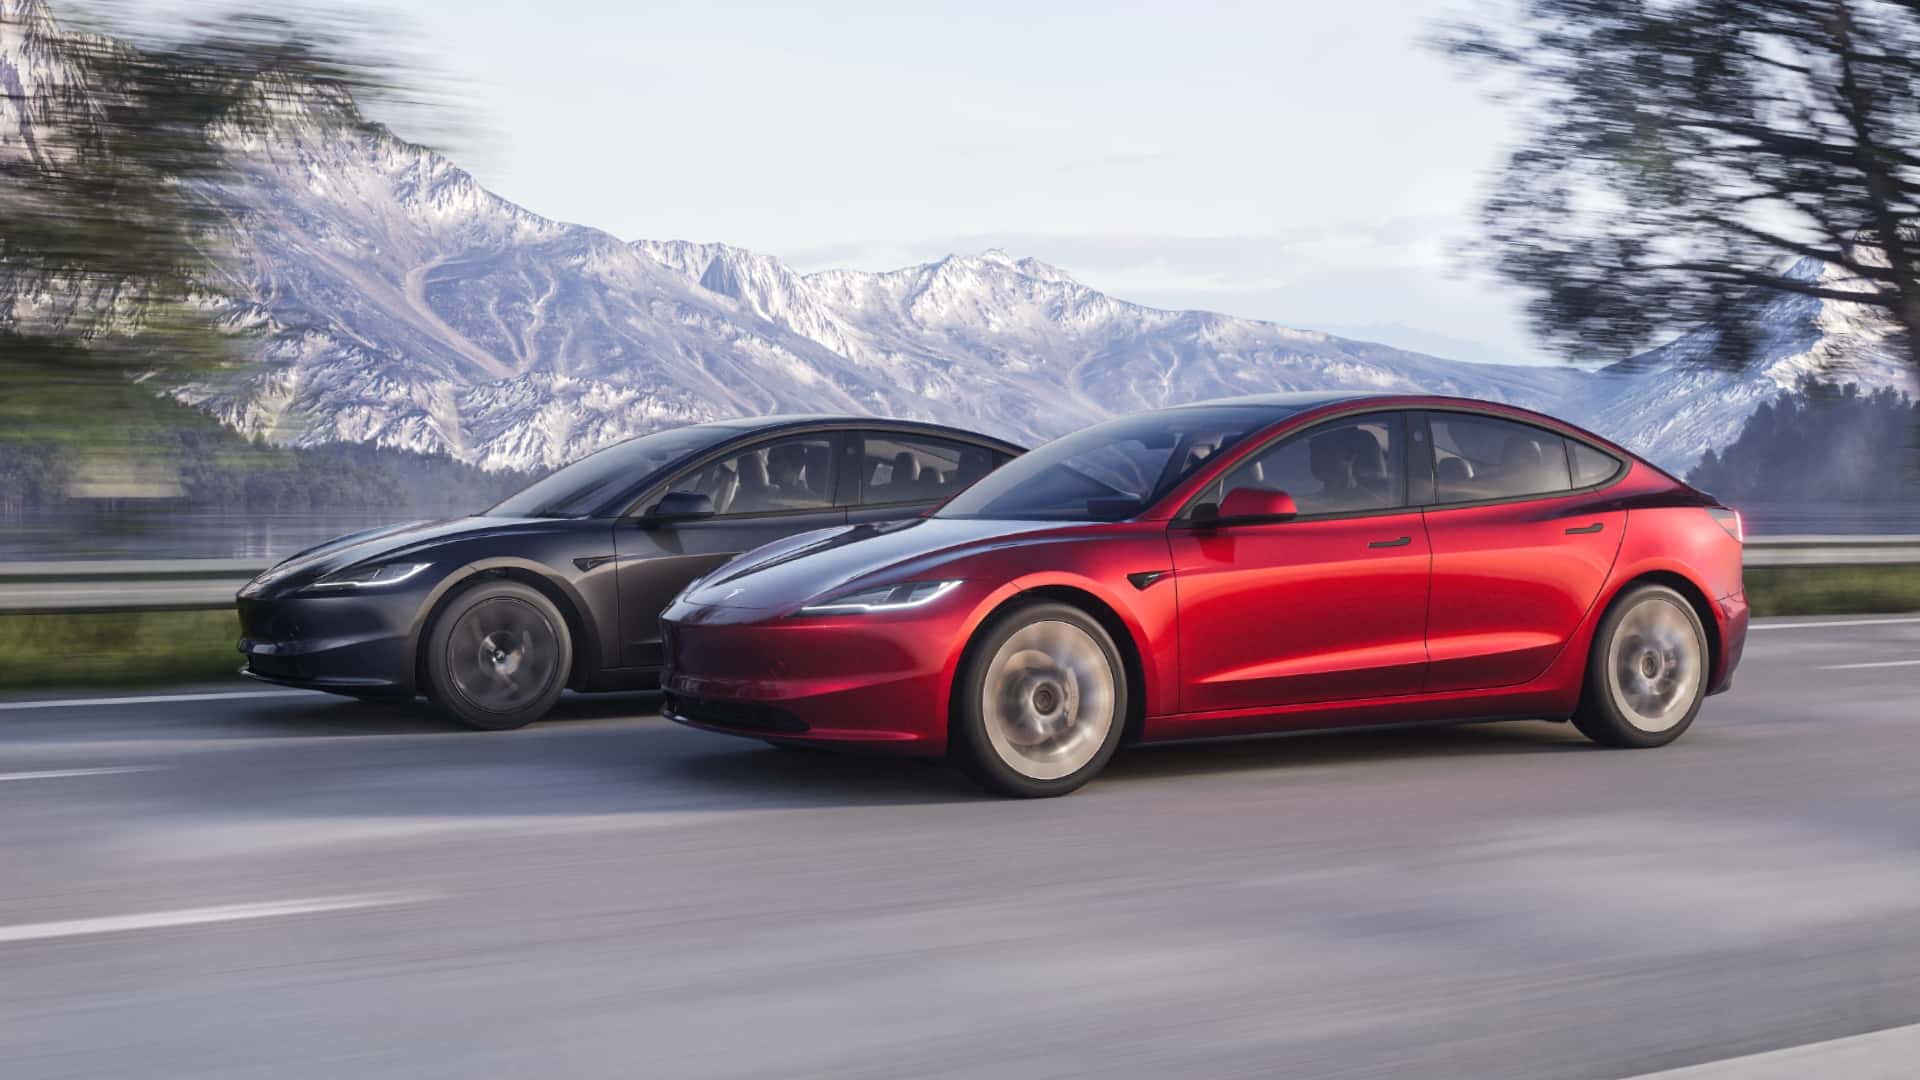 tesla model 3 highland now available in australia and new zealand, but not in uk